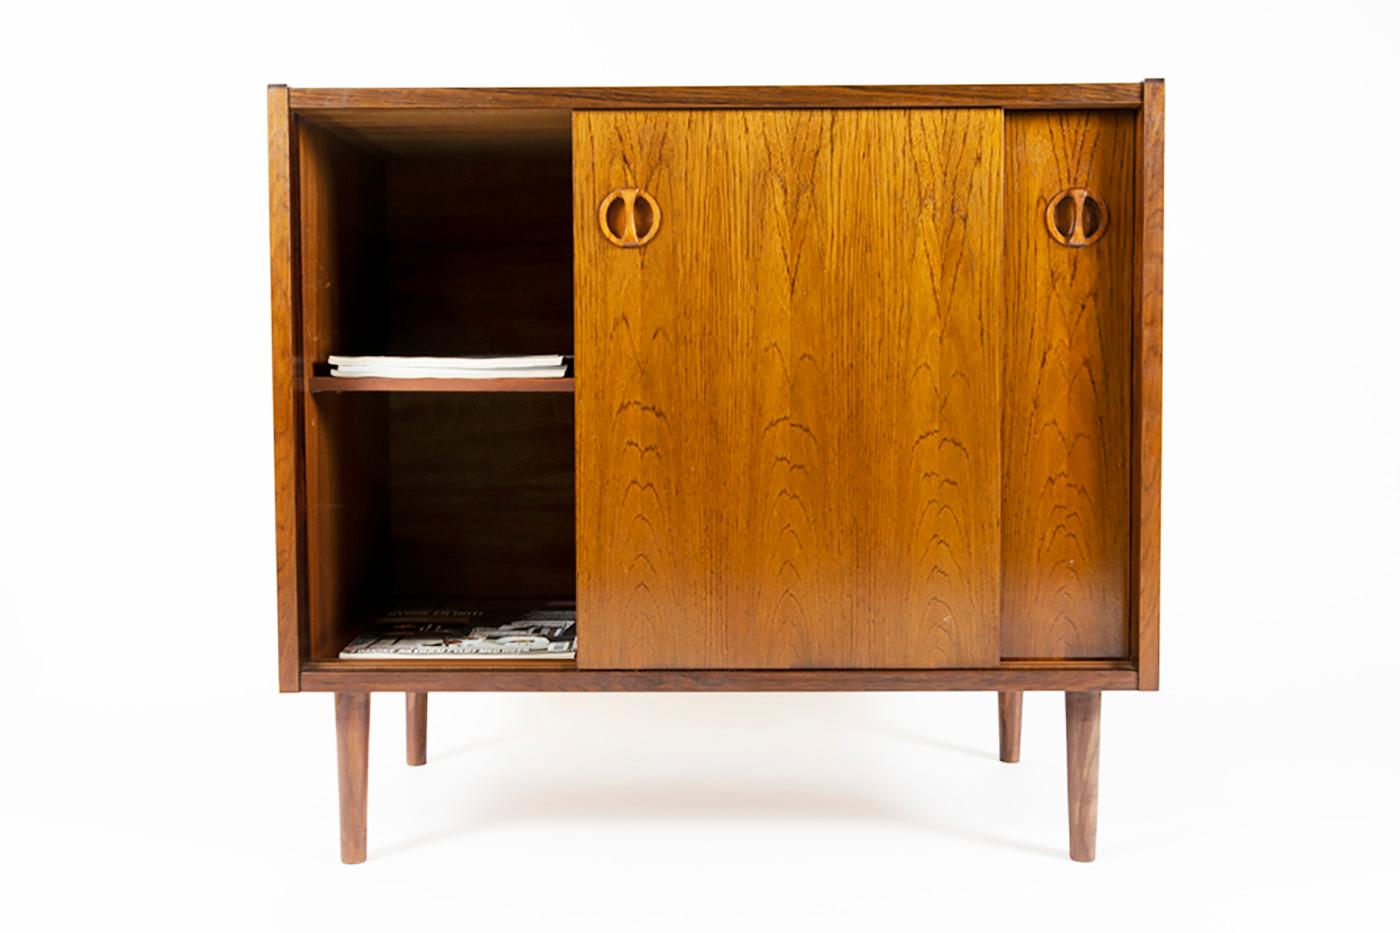 Very sweet sideboard, made of rosewood and rosewood veneer. Solid rosewood slide door handles. Made in Denmark in the 1960s. The sideboard has a twin, also offered for sale, slightly darker color. The cabinets are also offered for sale as a pair. As